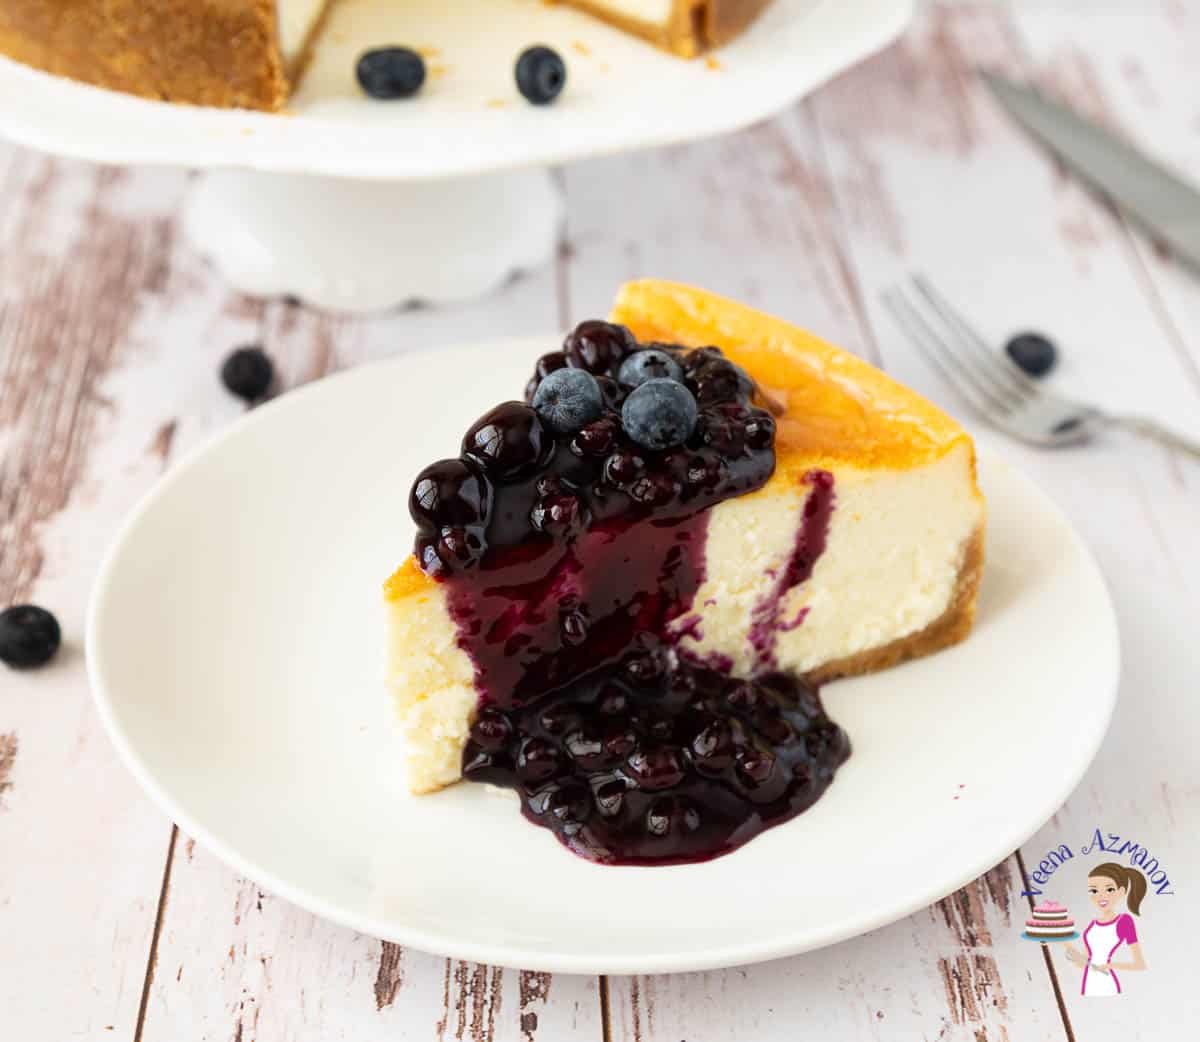 A slice of cheesecake with blueberry sauce.